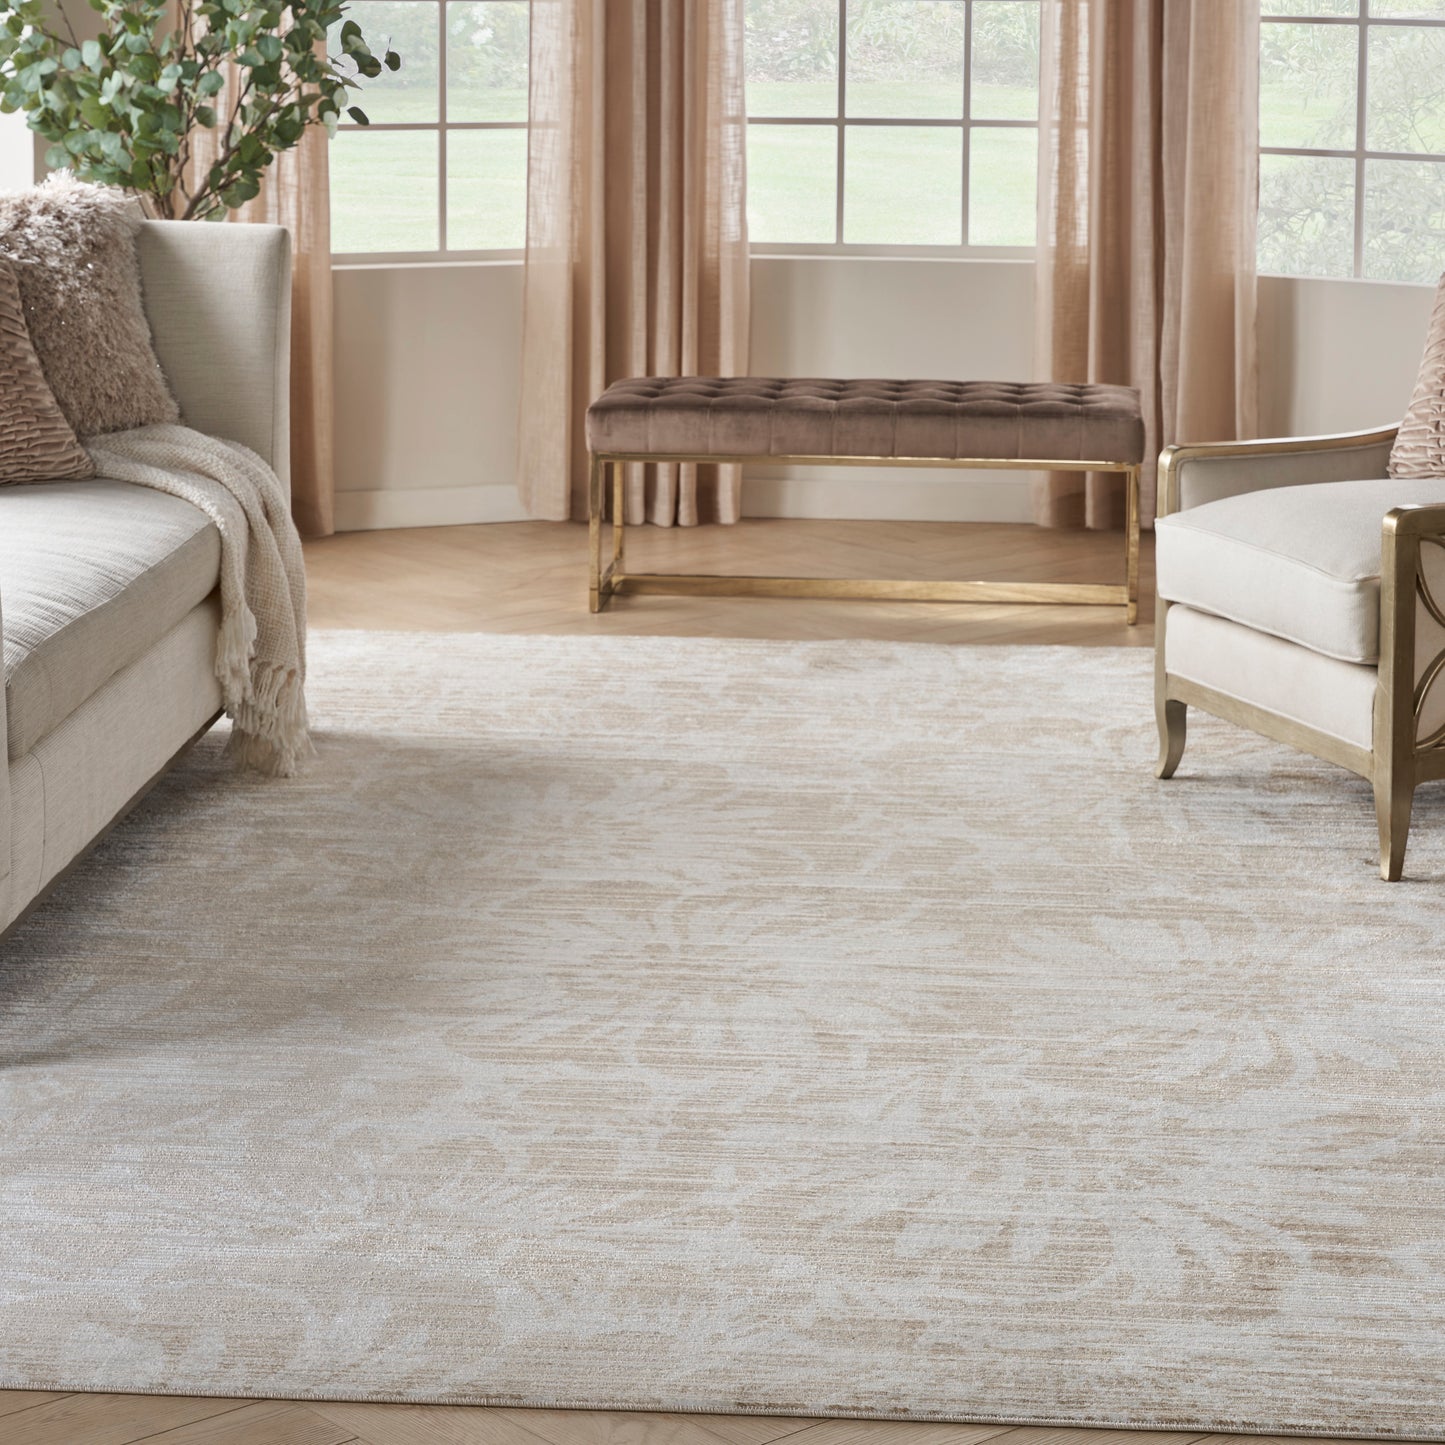 Inspire Me! Home Décor Iliana ILI02 Ivory Grey with Gold Accents  Contemporary Machinemade Rug